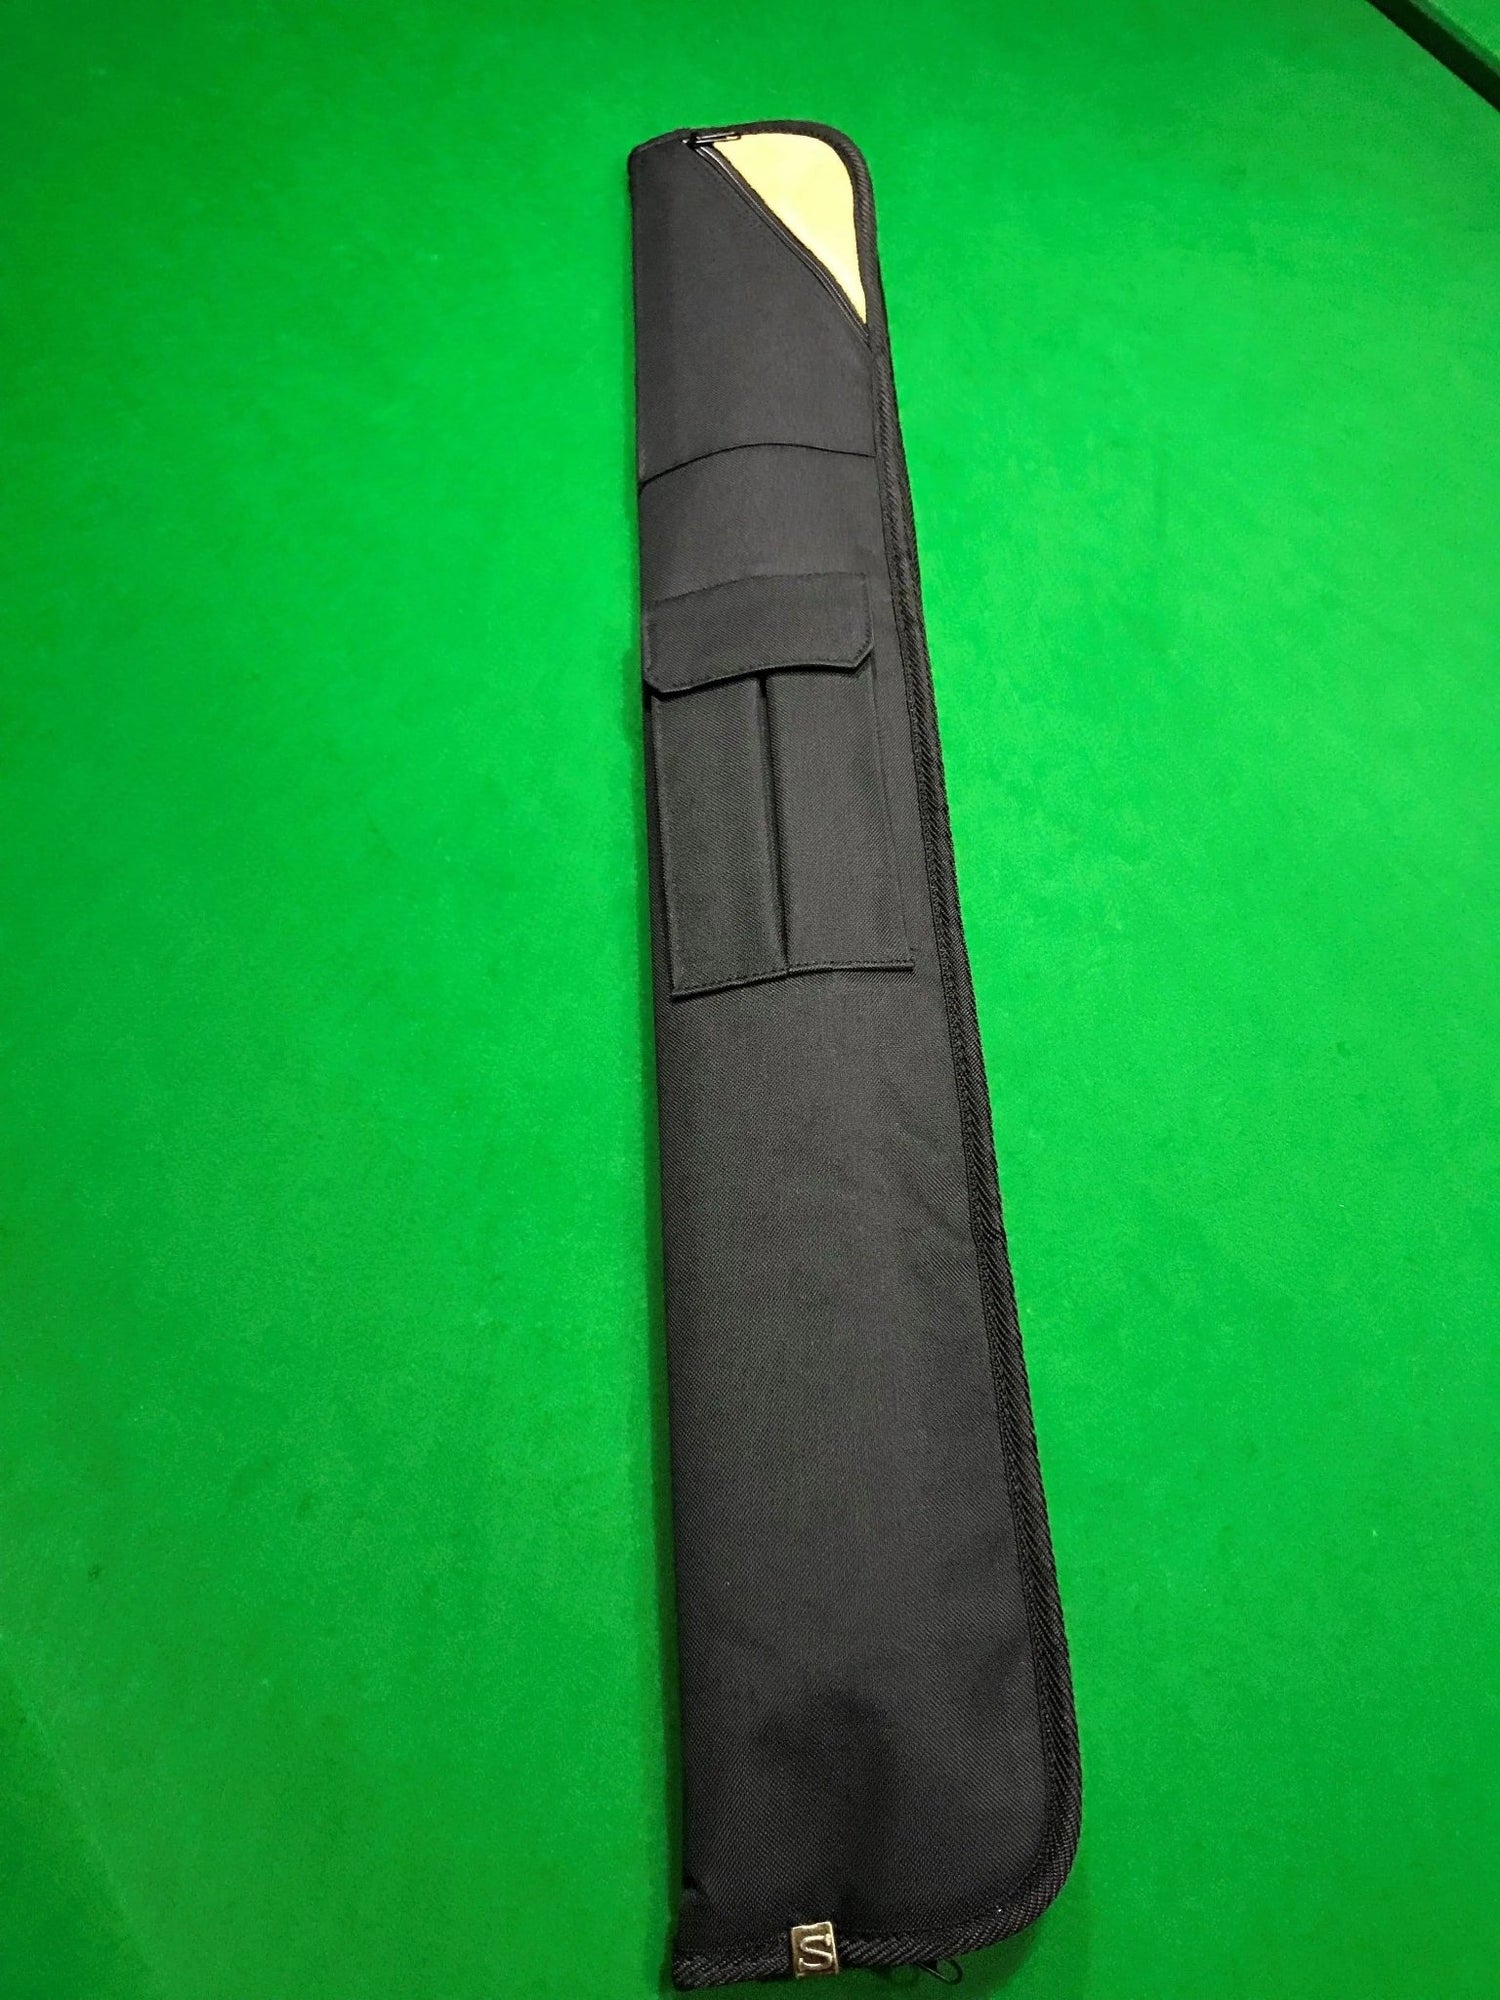 Soft 2 Piece Pool Snooker Billiard Cue Case Black with Brown Suede - Q-Masters